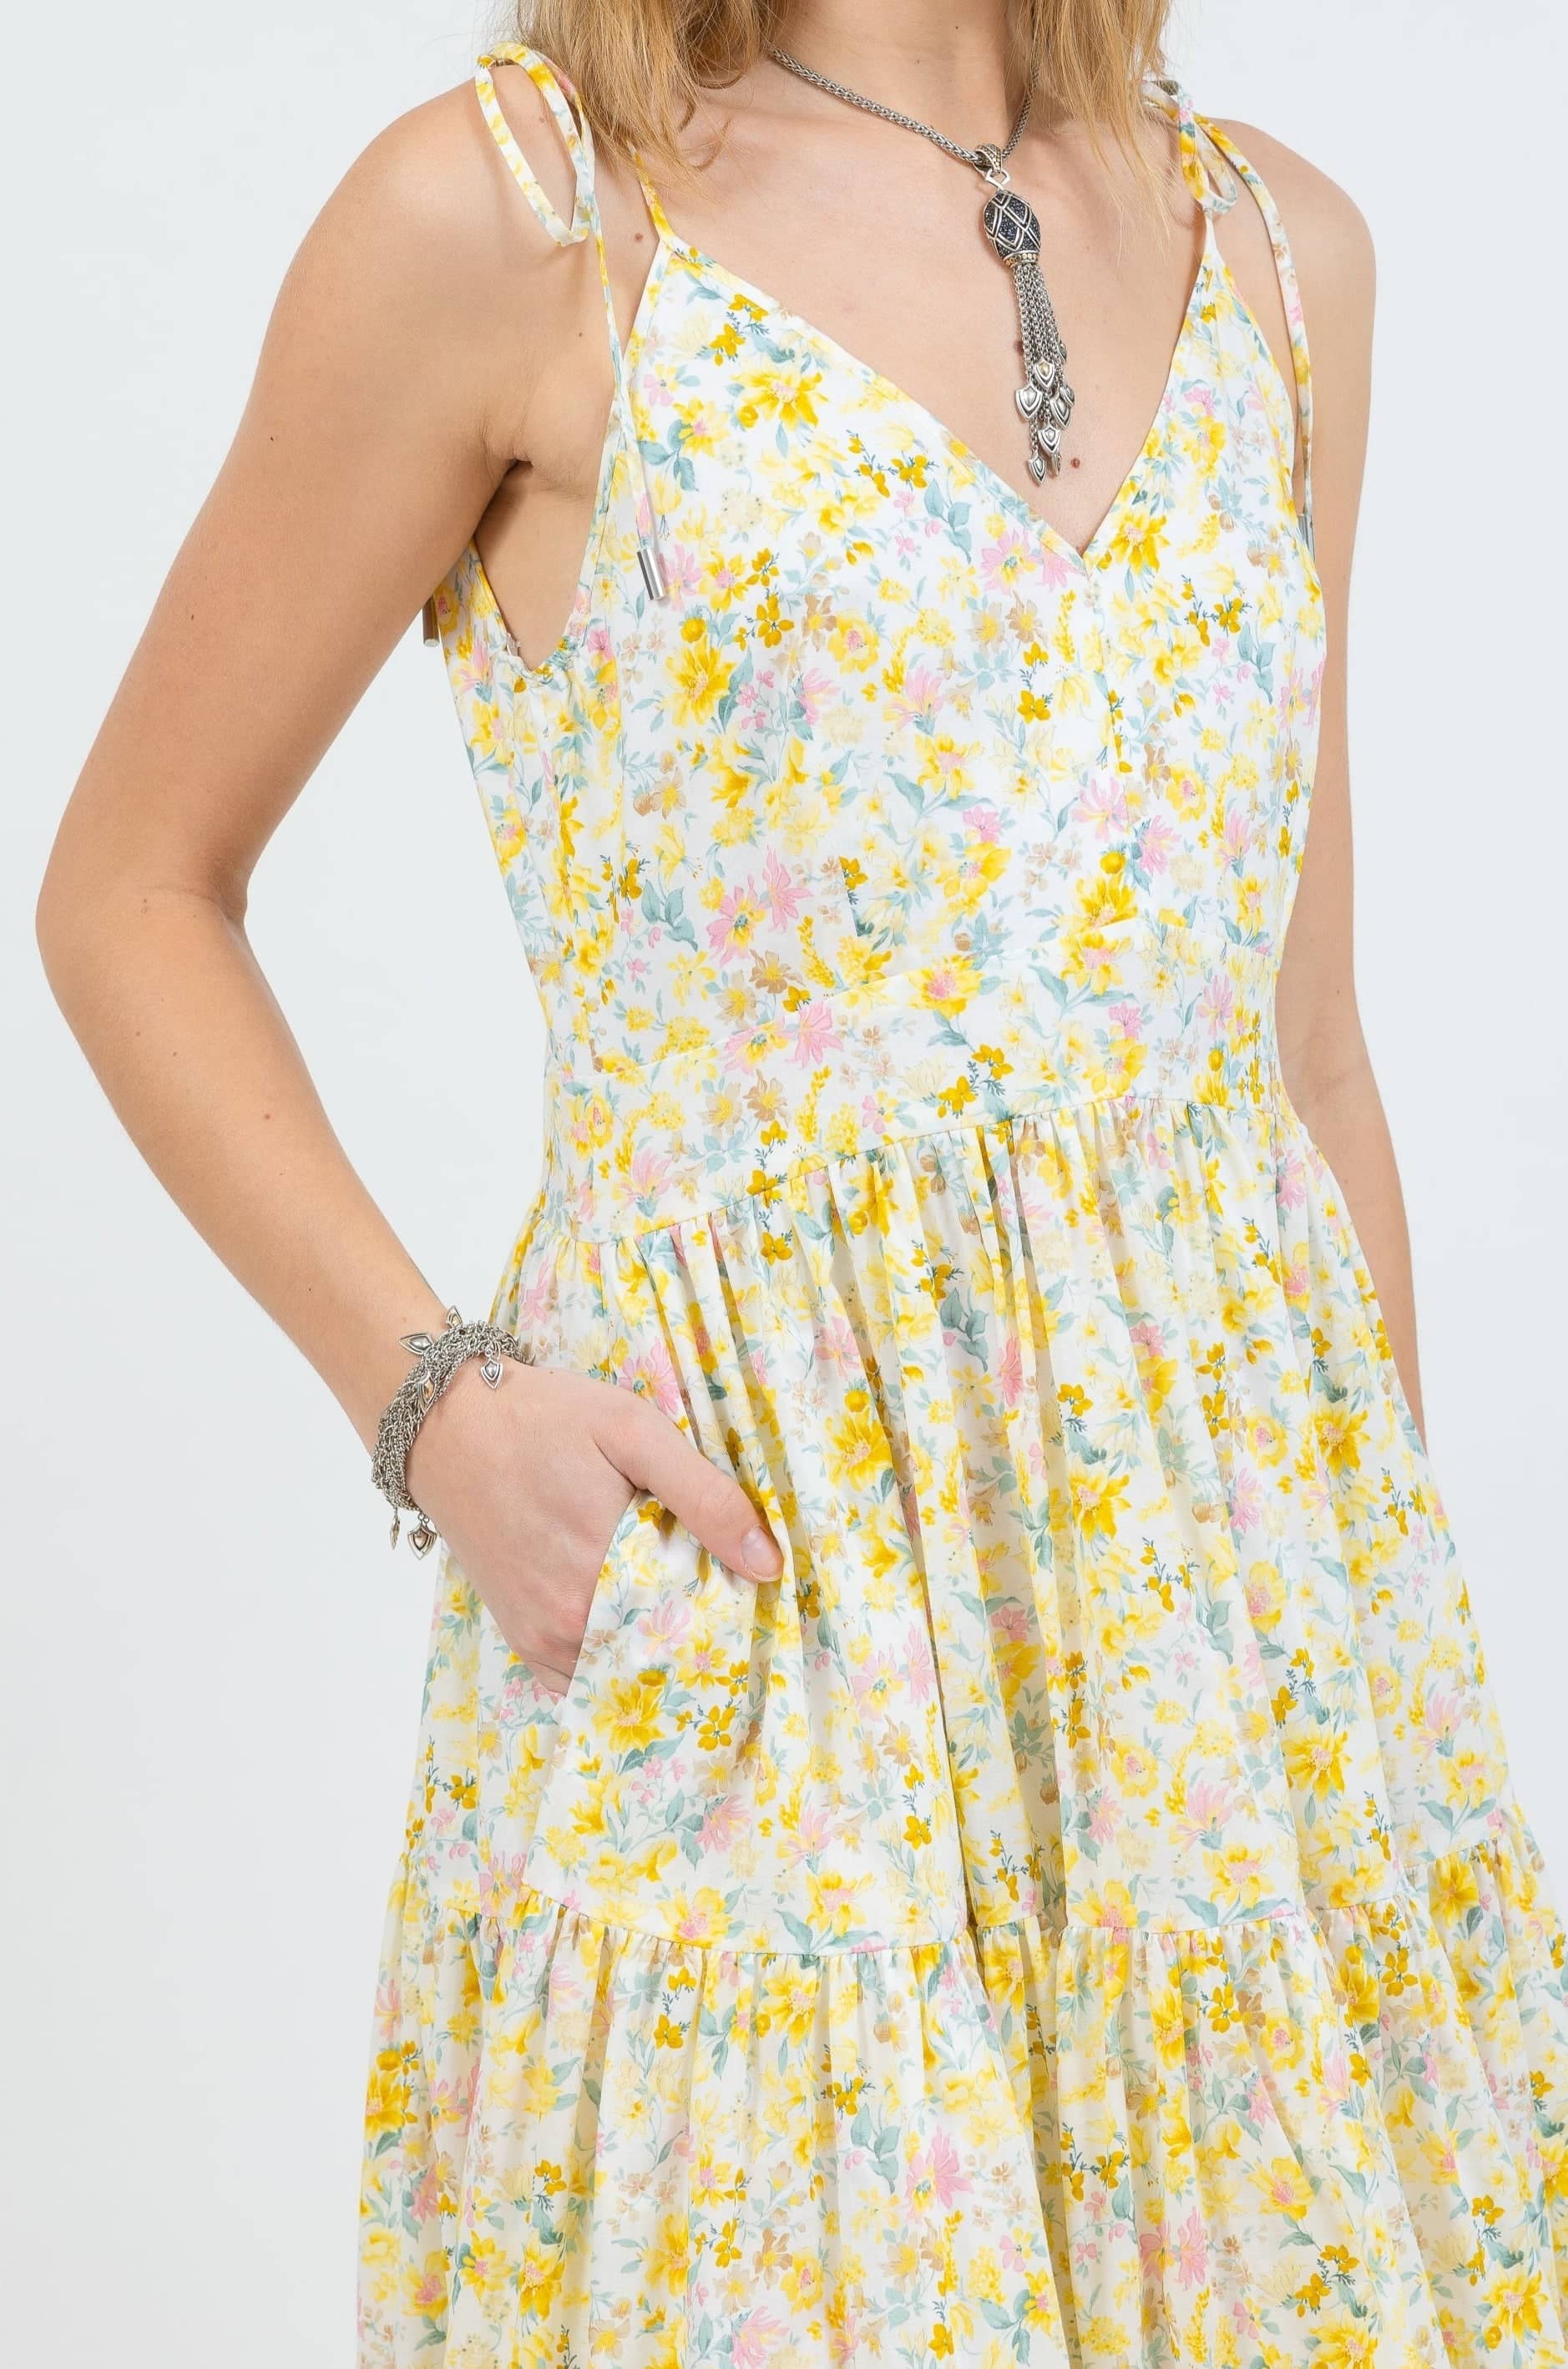 The Strappy Maxi Dress in Yellow Floral